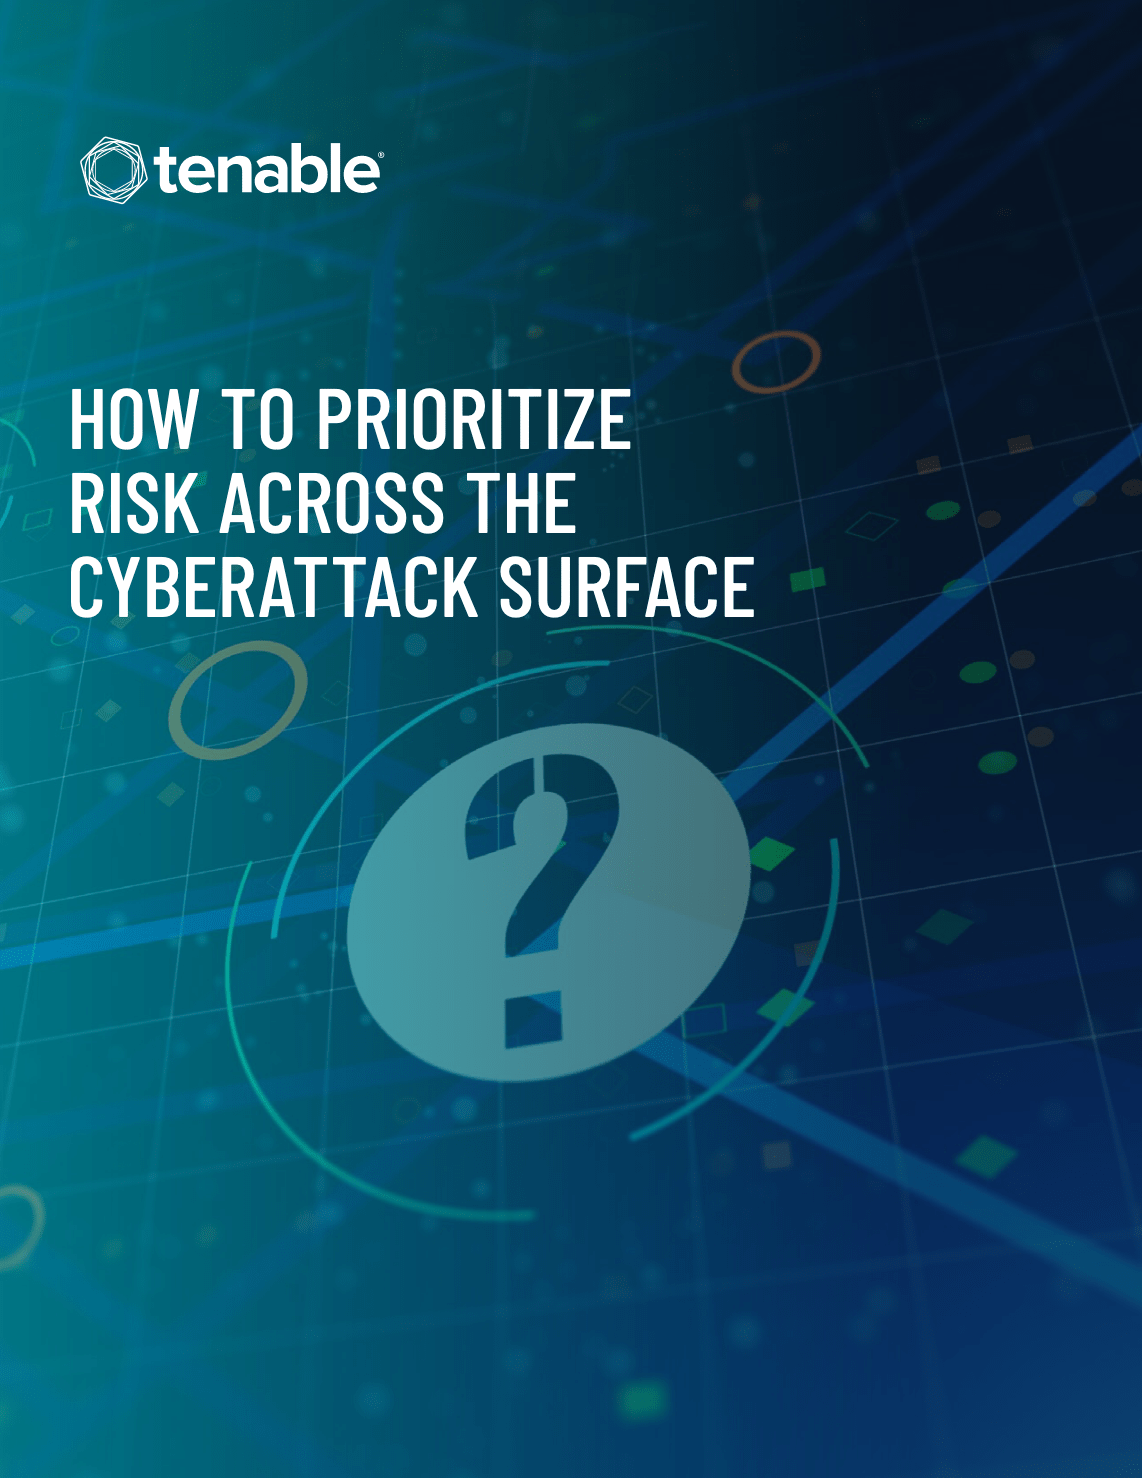 Screenshot 2020 11 24 Whitepaper How to Prioritize Risk Across the Cyberattack Surface pdf - How to Prioritize Risk across the cyber attack surface